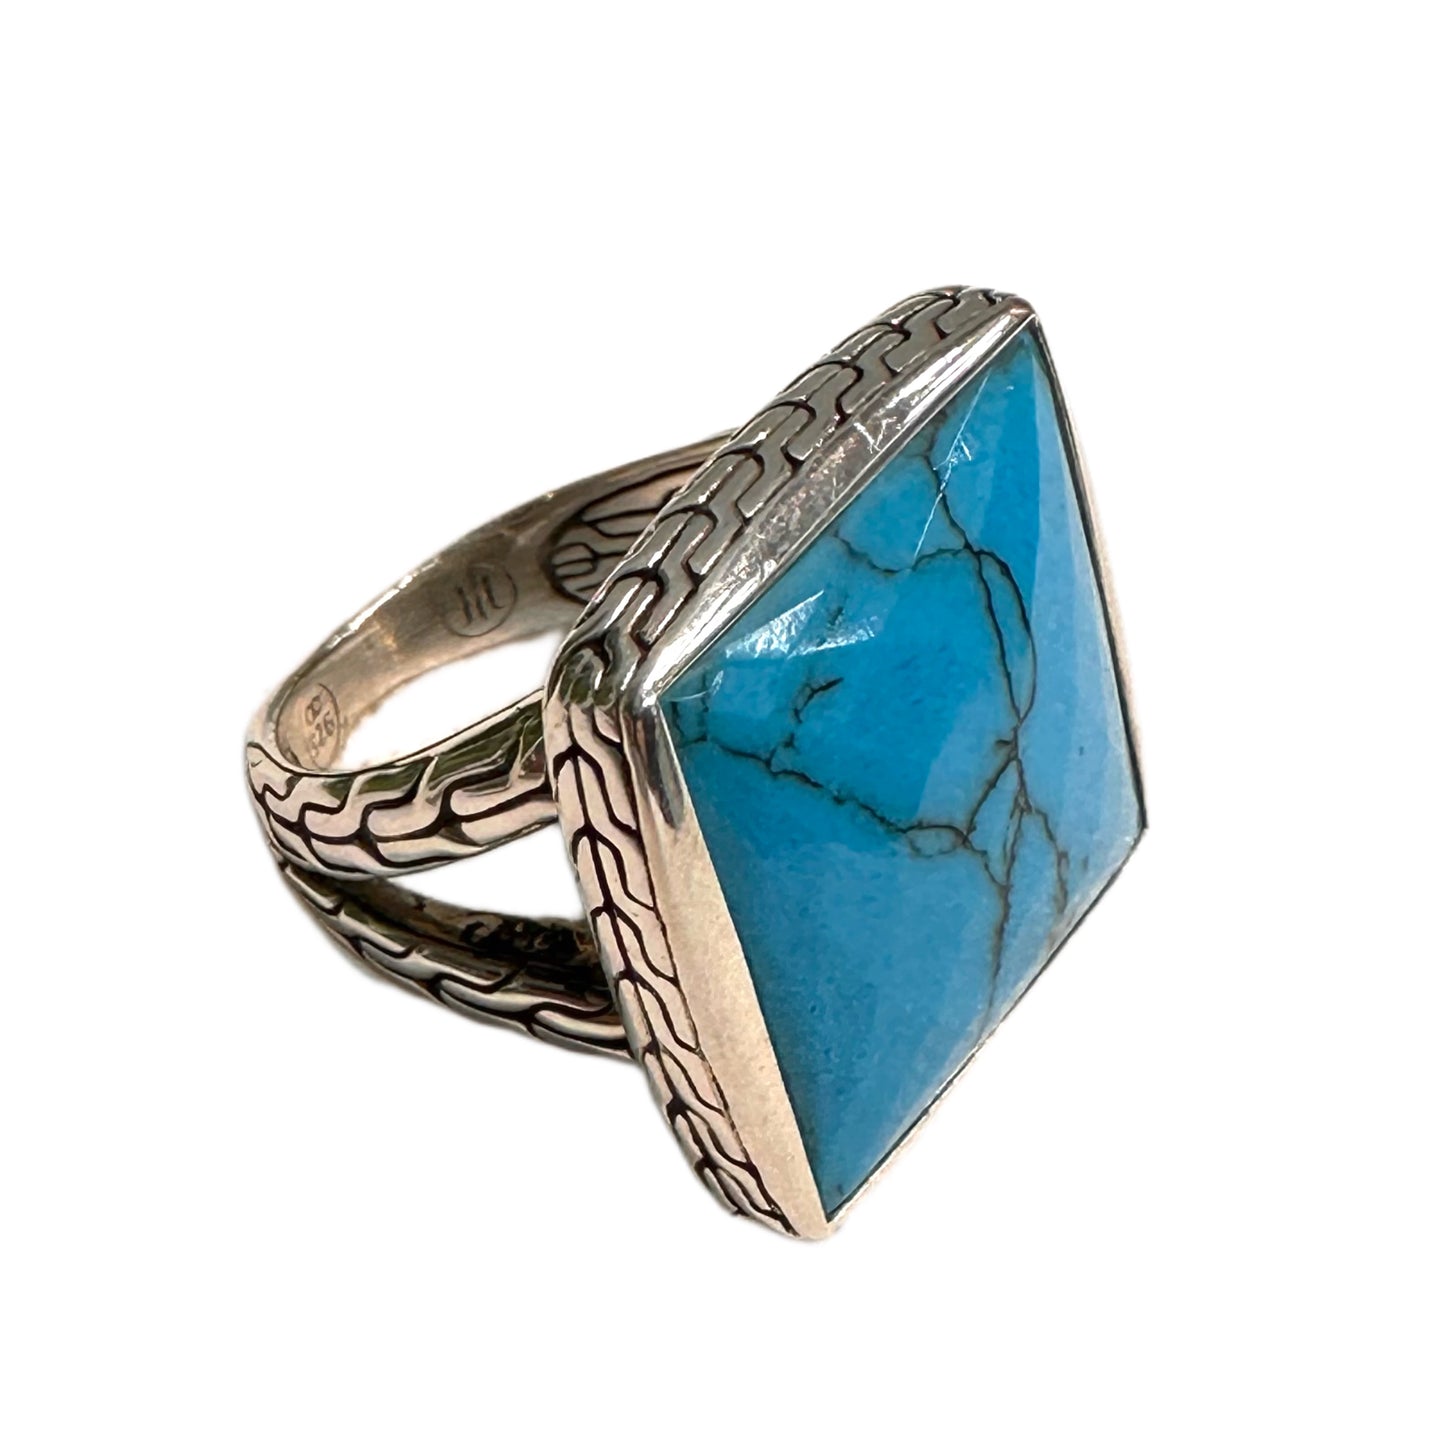 JOHN HARDY Turquoise and Sterling Silver Ring, Size 6